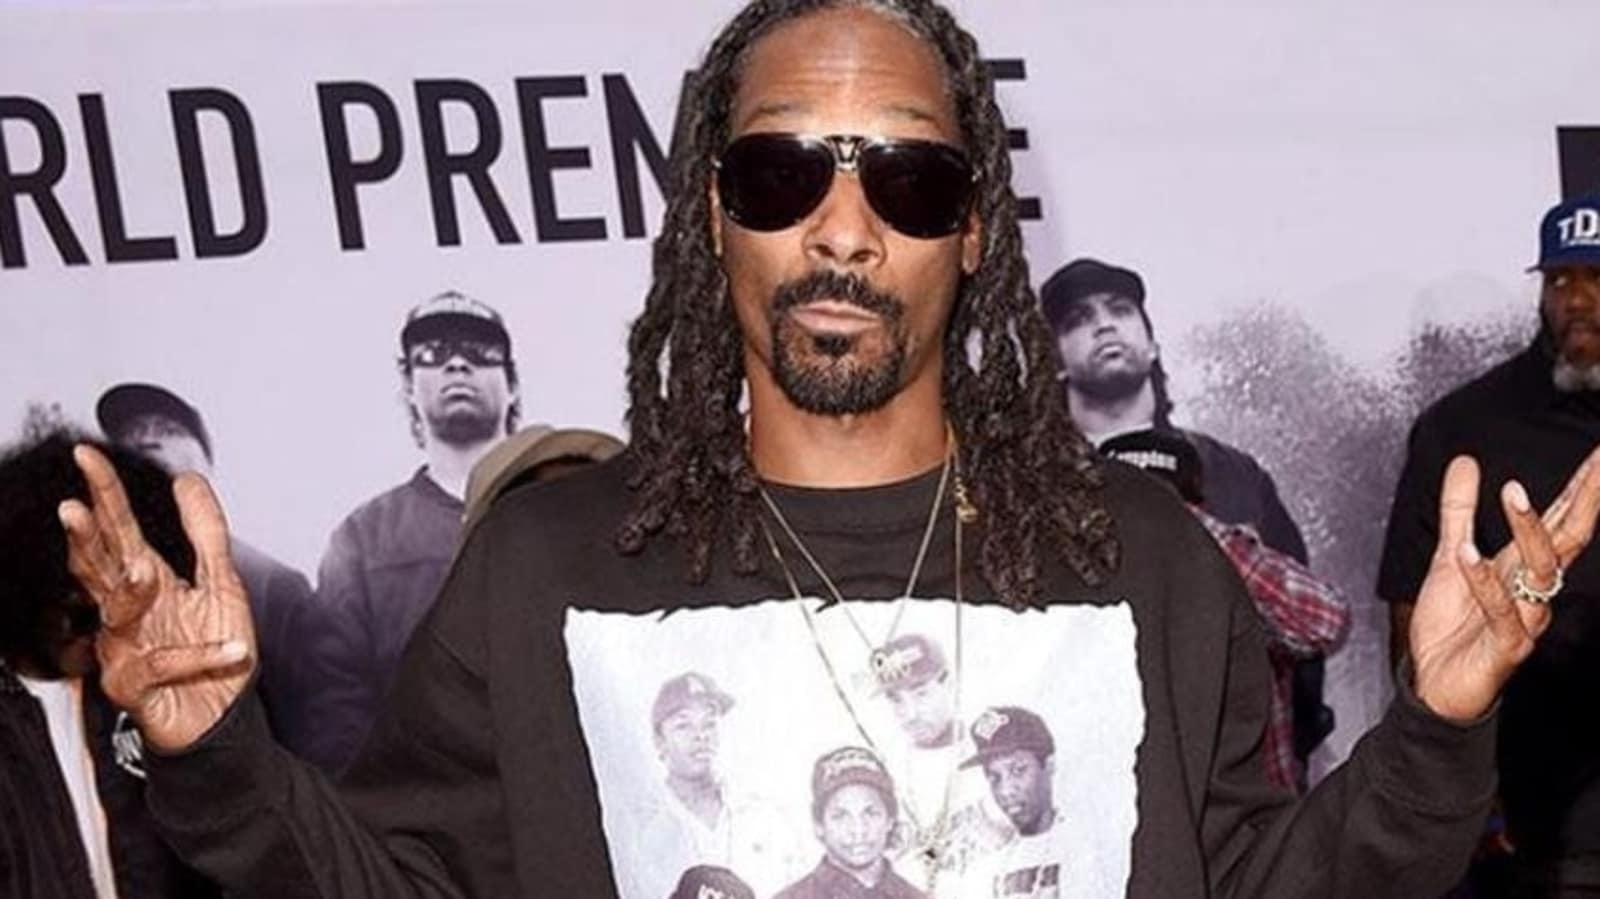 All about Snoop Dogg and his family